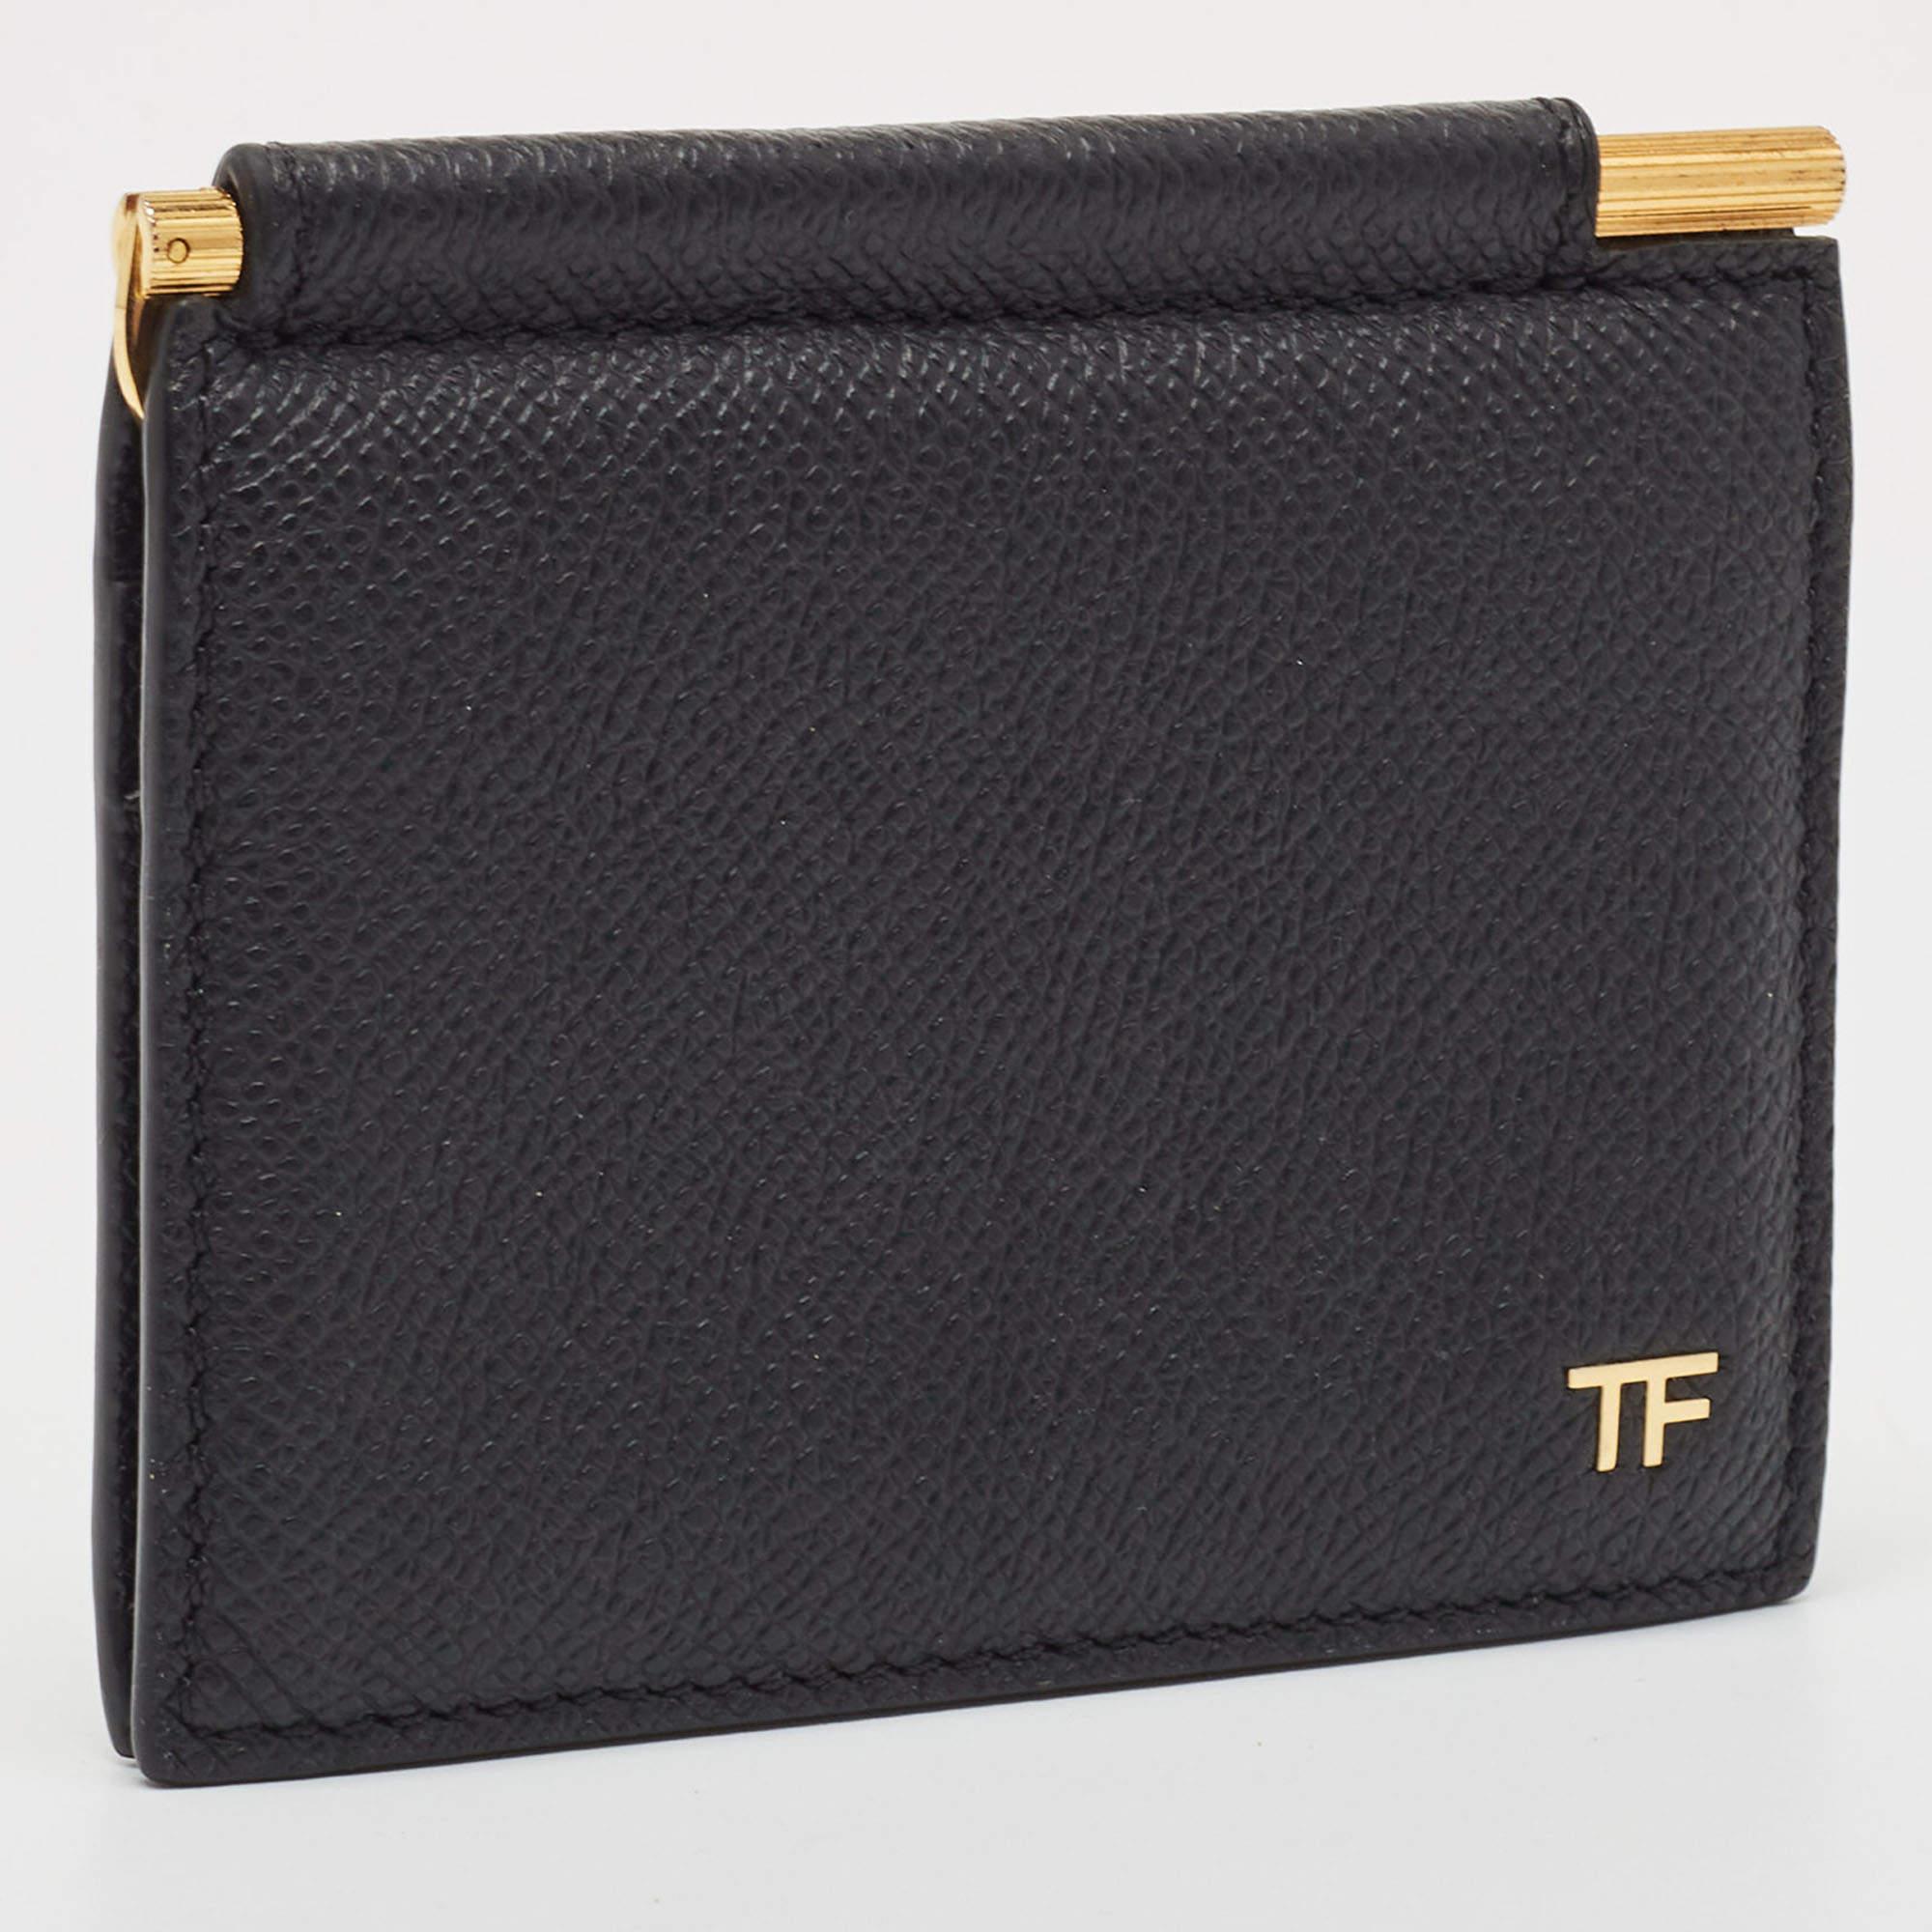 This Tom Ford money clip is carefully crafted to offer you a luxurious accessory you will cherish. It is marked by high quality and enduring appeal. Invest in it today!

